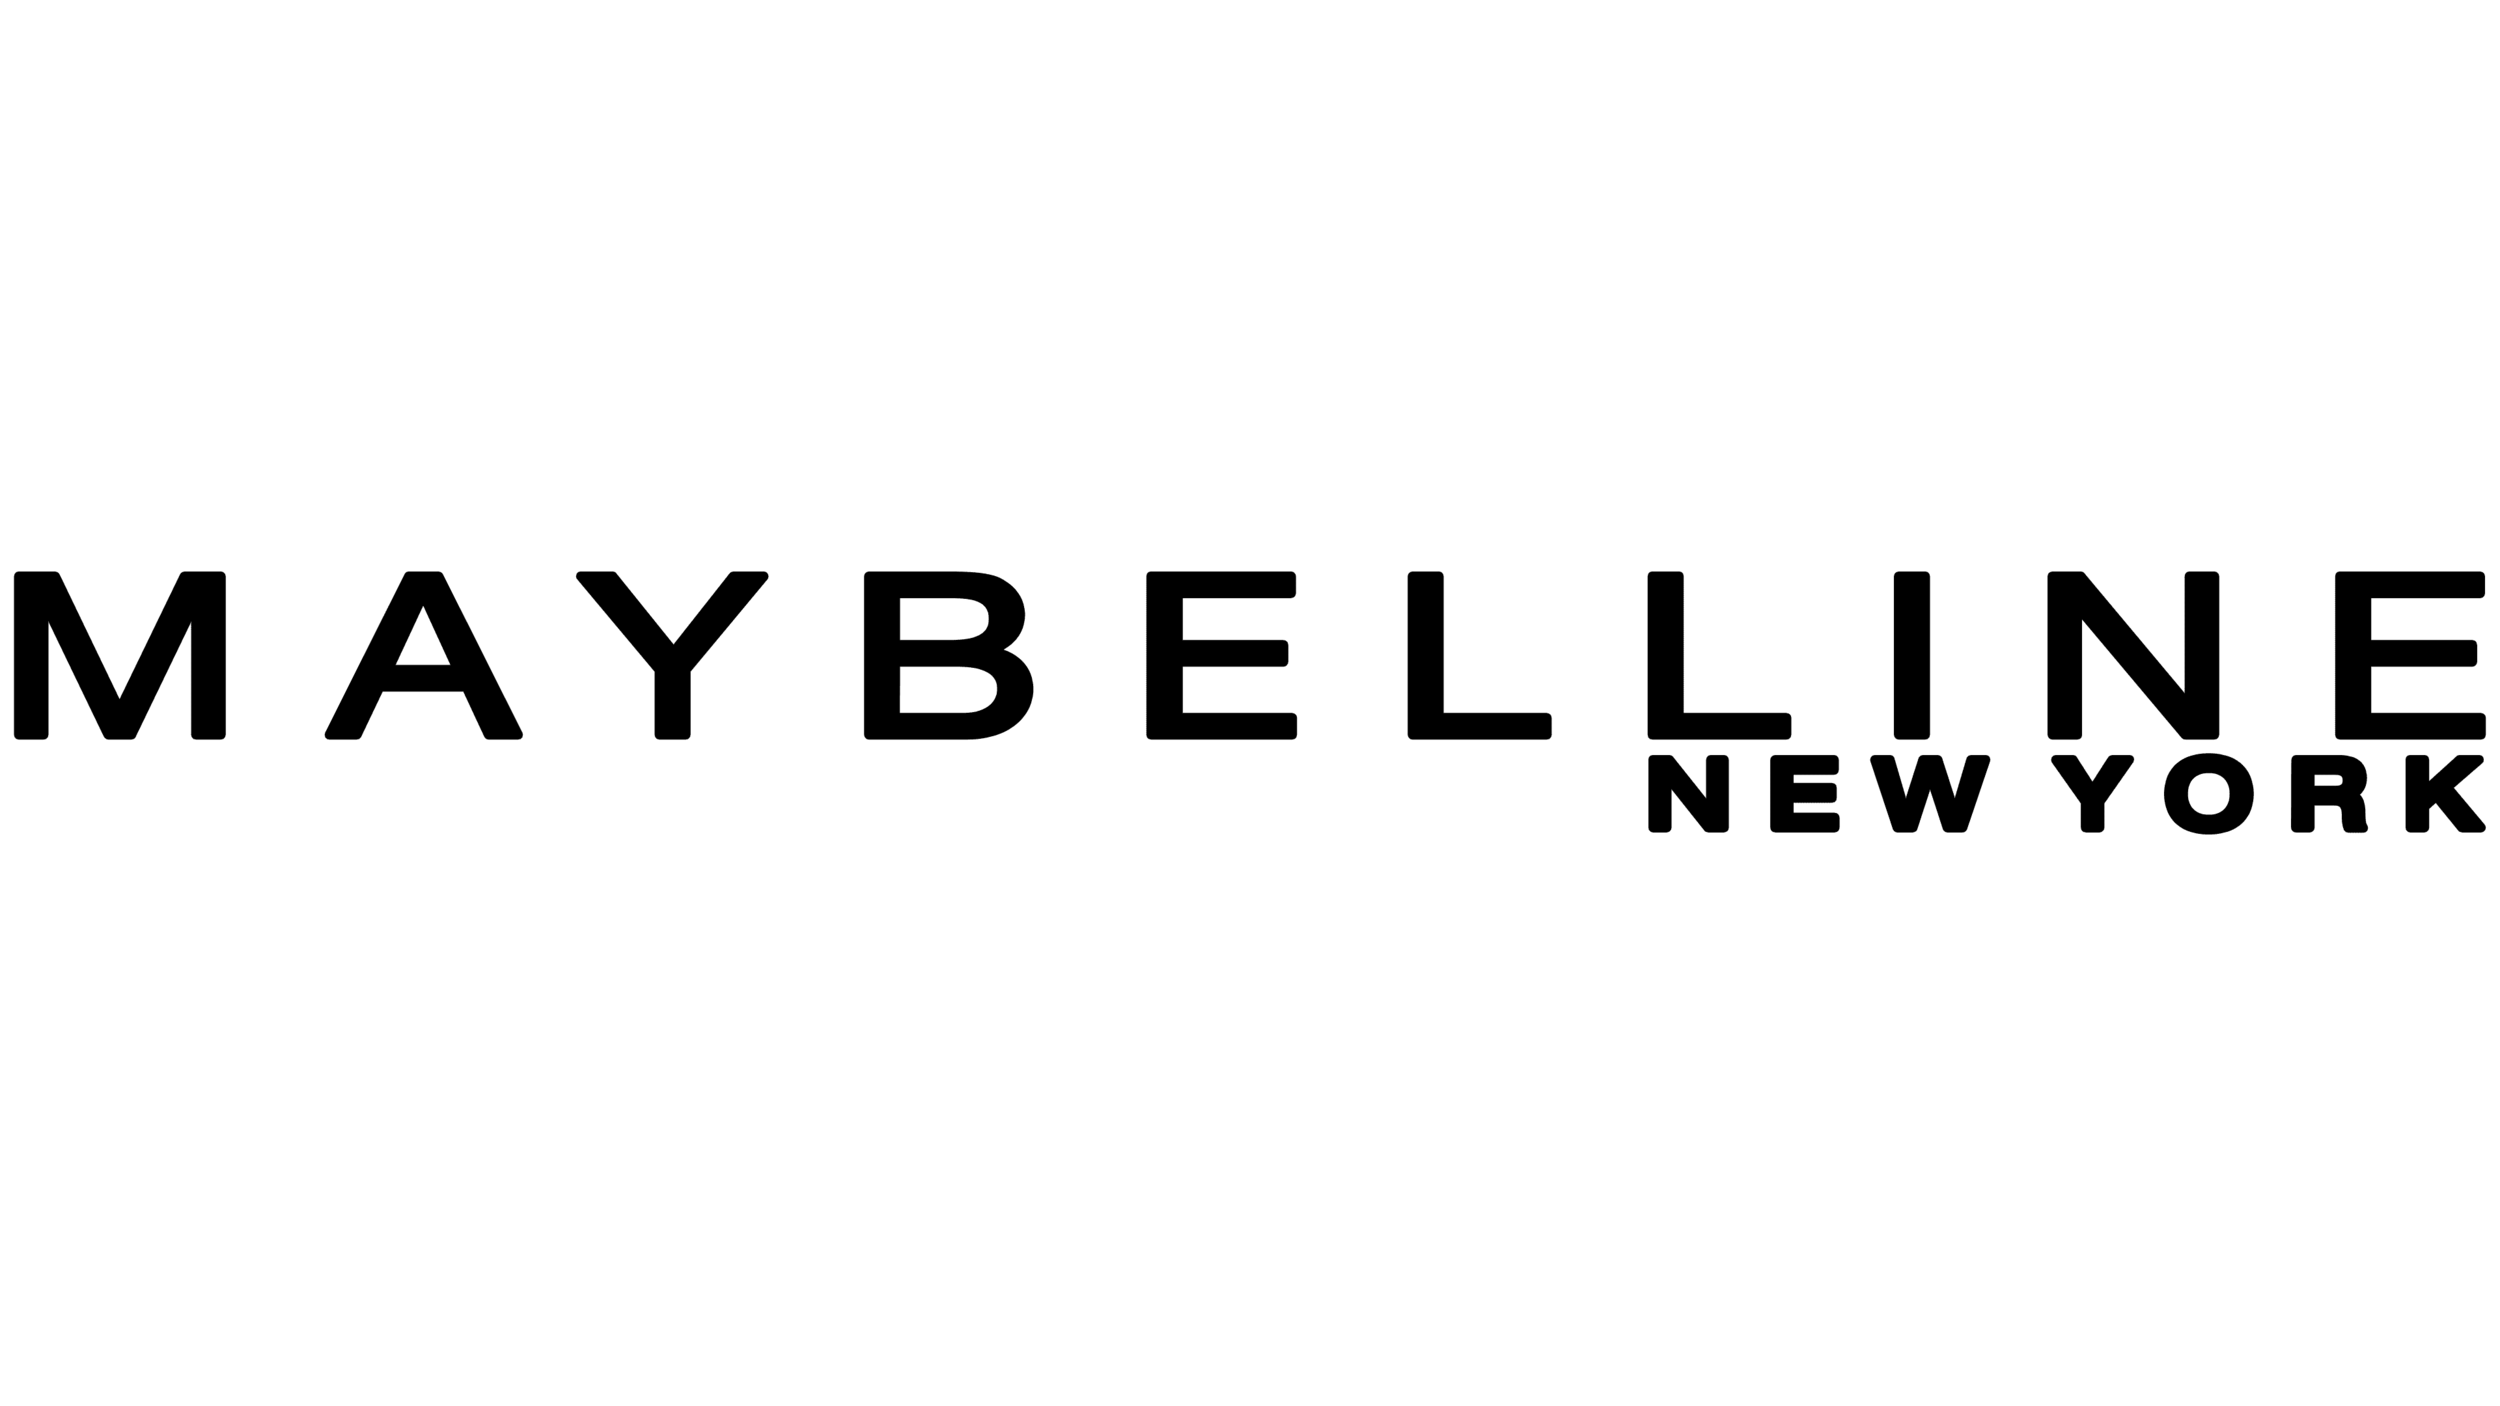 Copy of Maybelline logo 2 (1).png